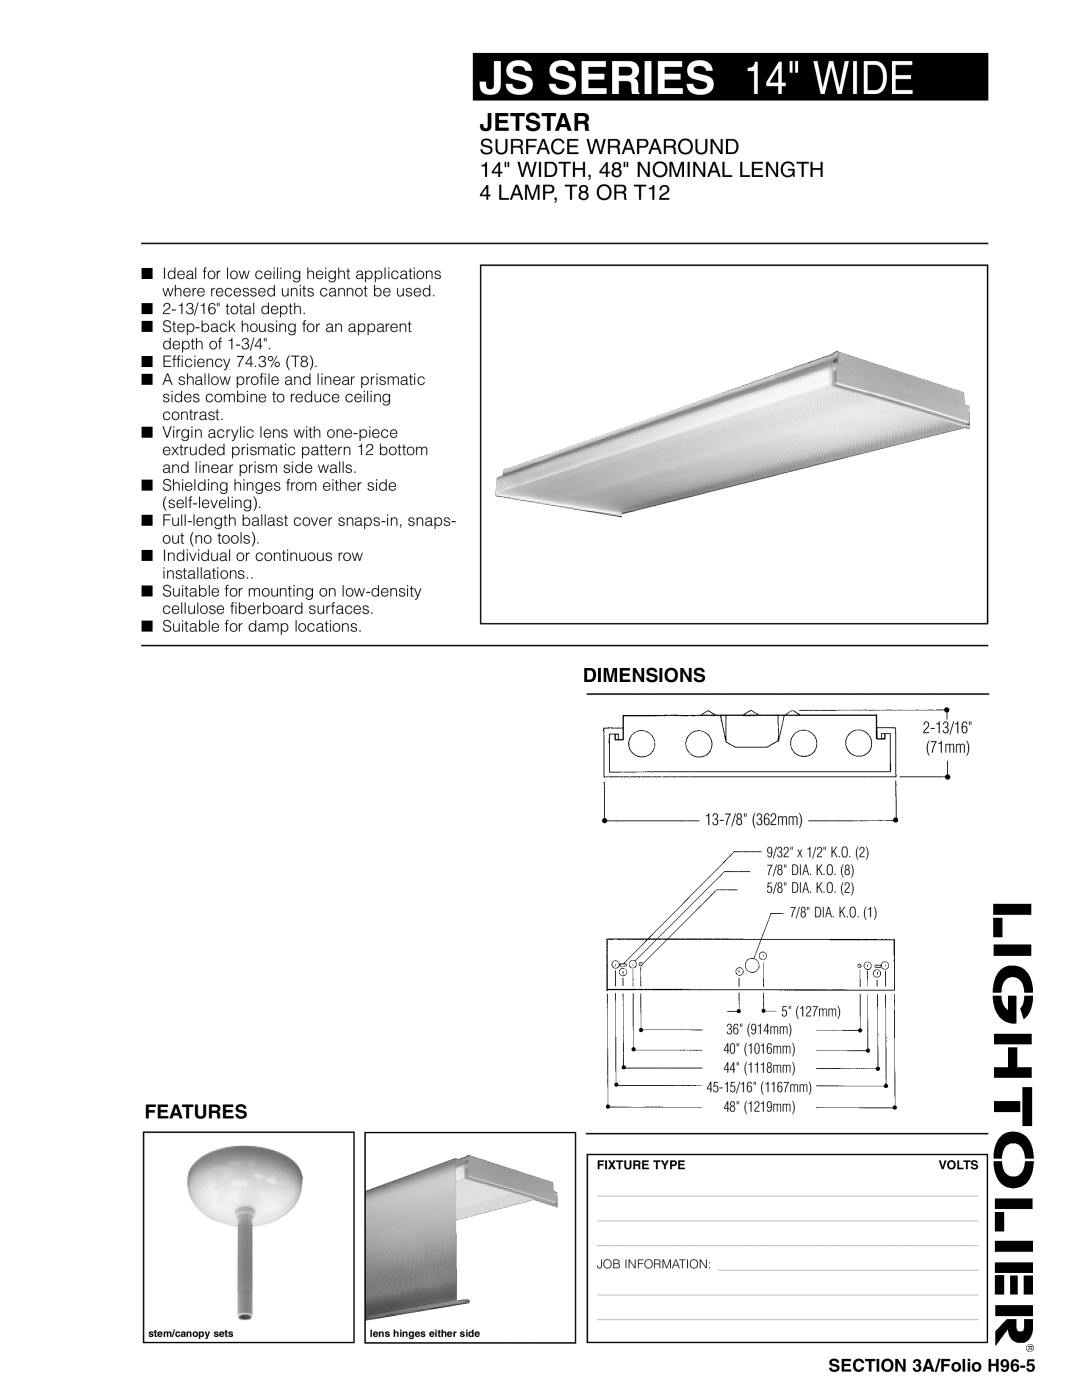 Lightolier JS Series dimensions Jetstar, Dimensions, Features, JS SERIES 14 WIDE, Surface Wraparound, A/Folio H96-5 